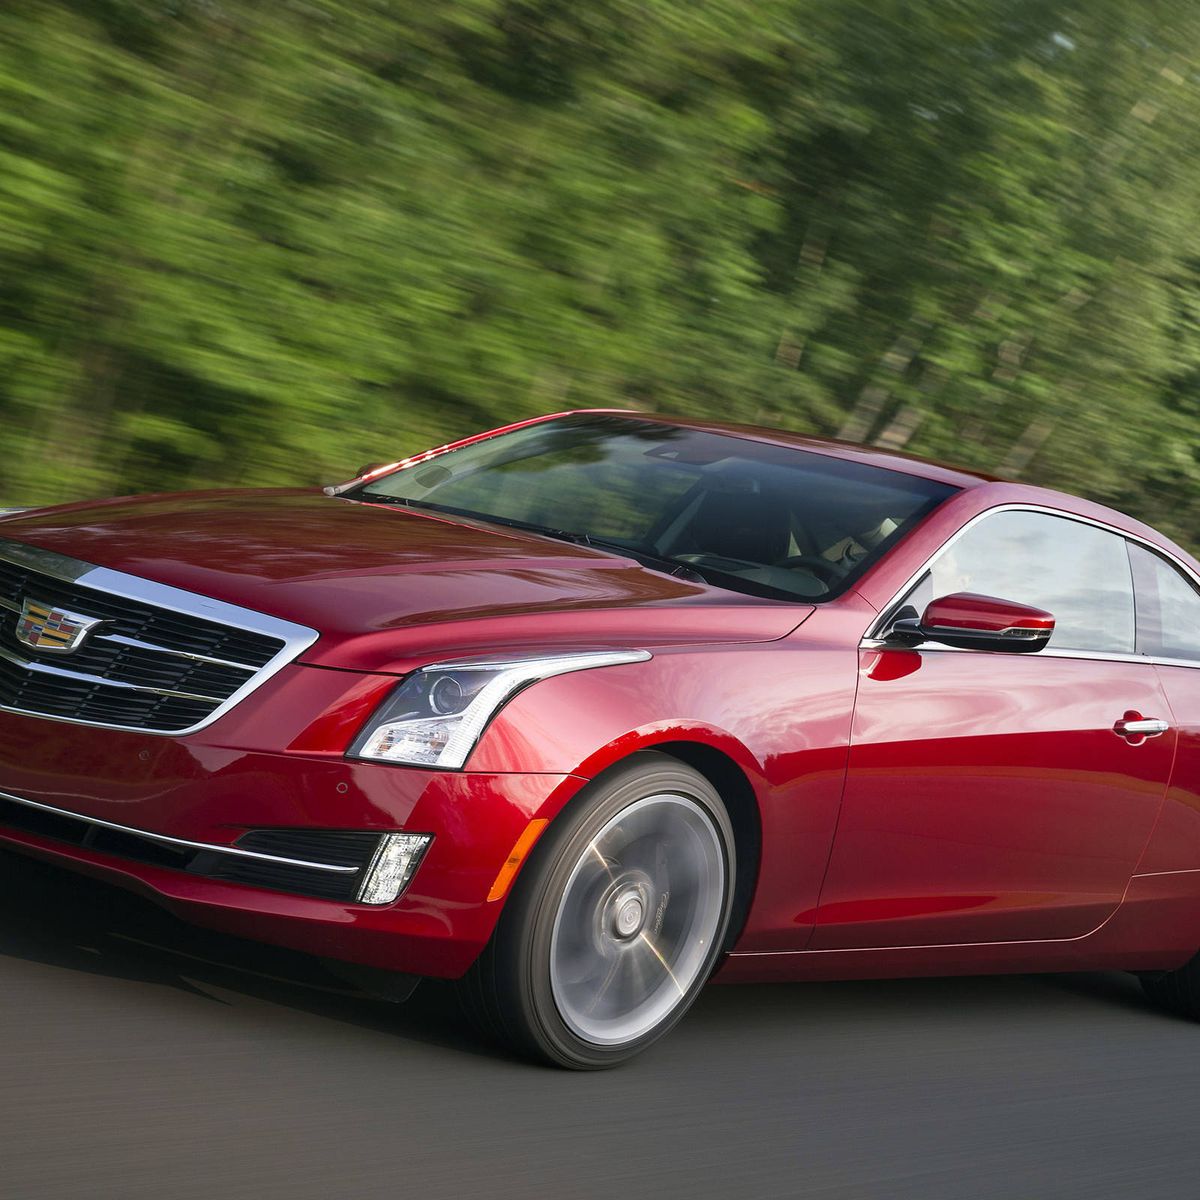 2016 Cadillac ATS Coupe review notes: Best-looking luxury coupe